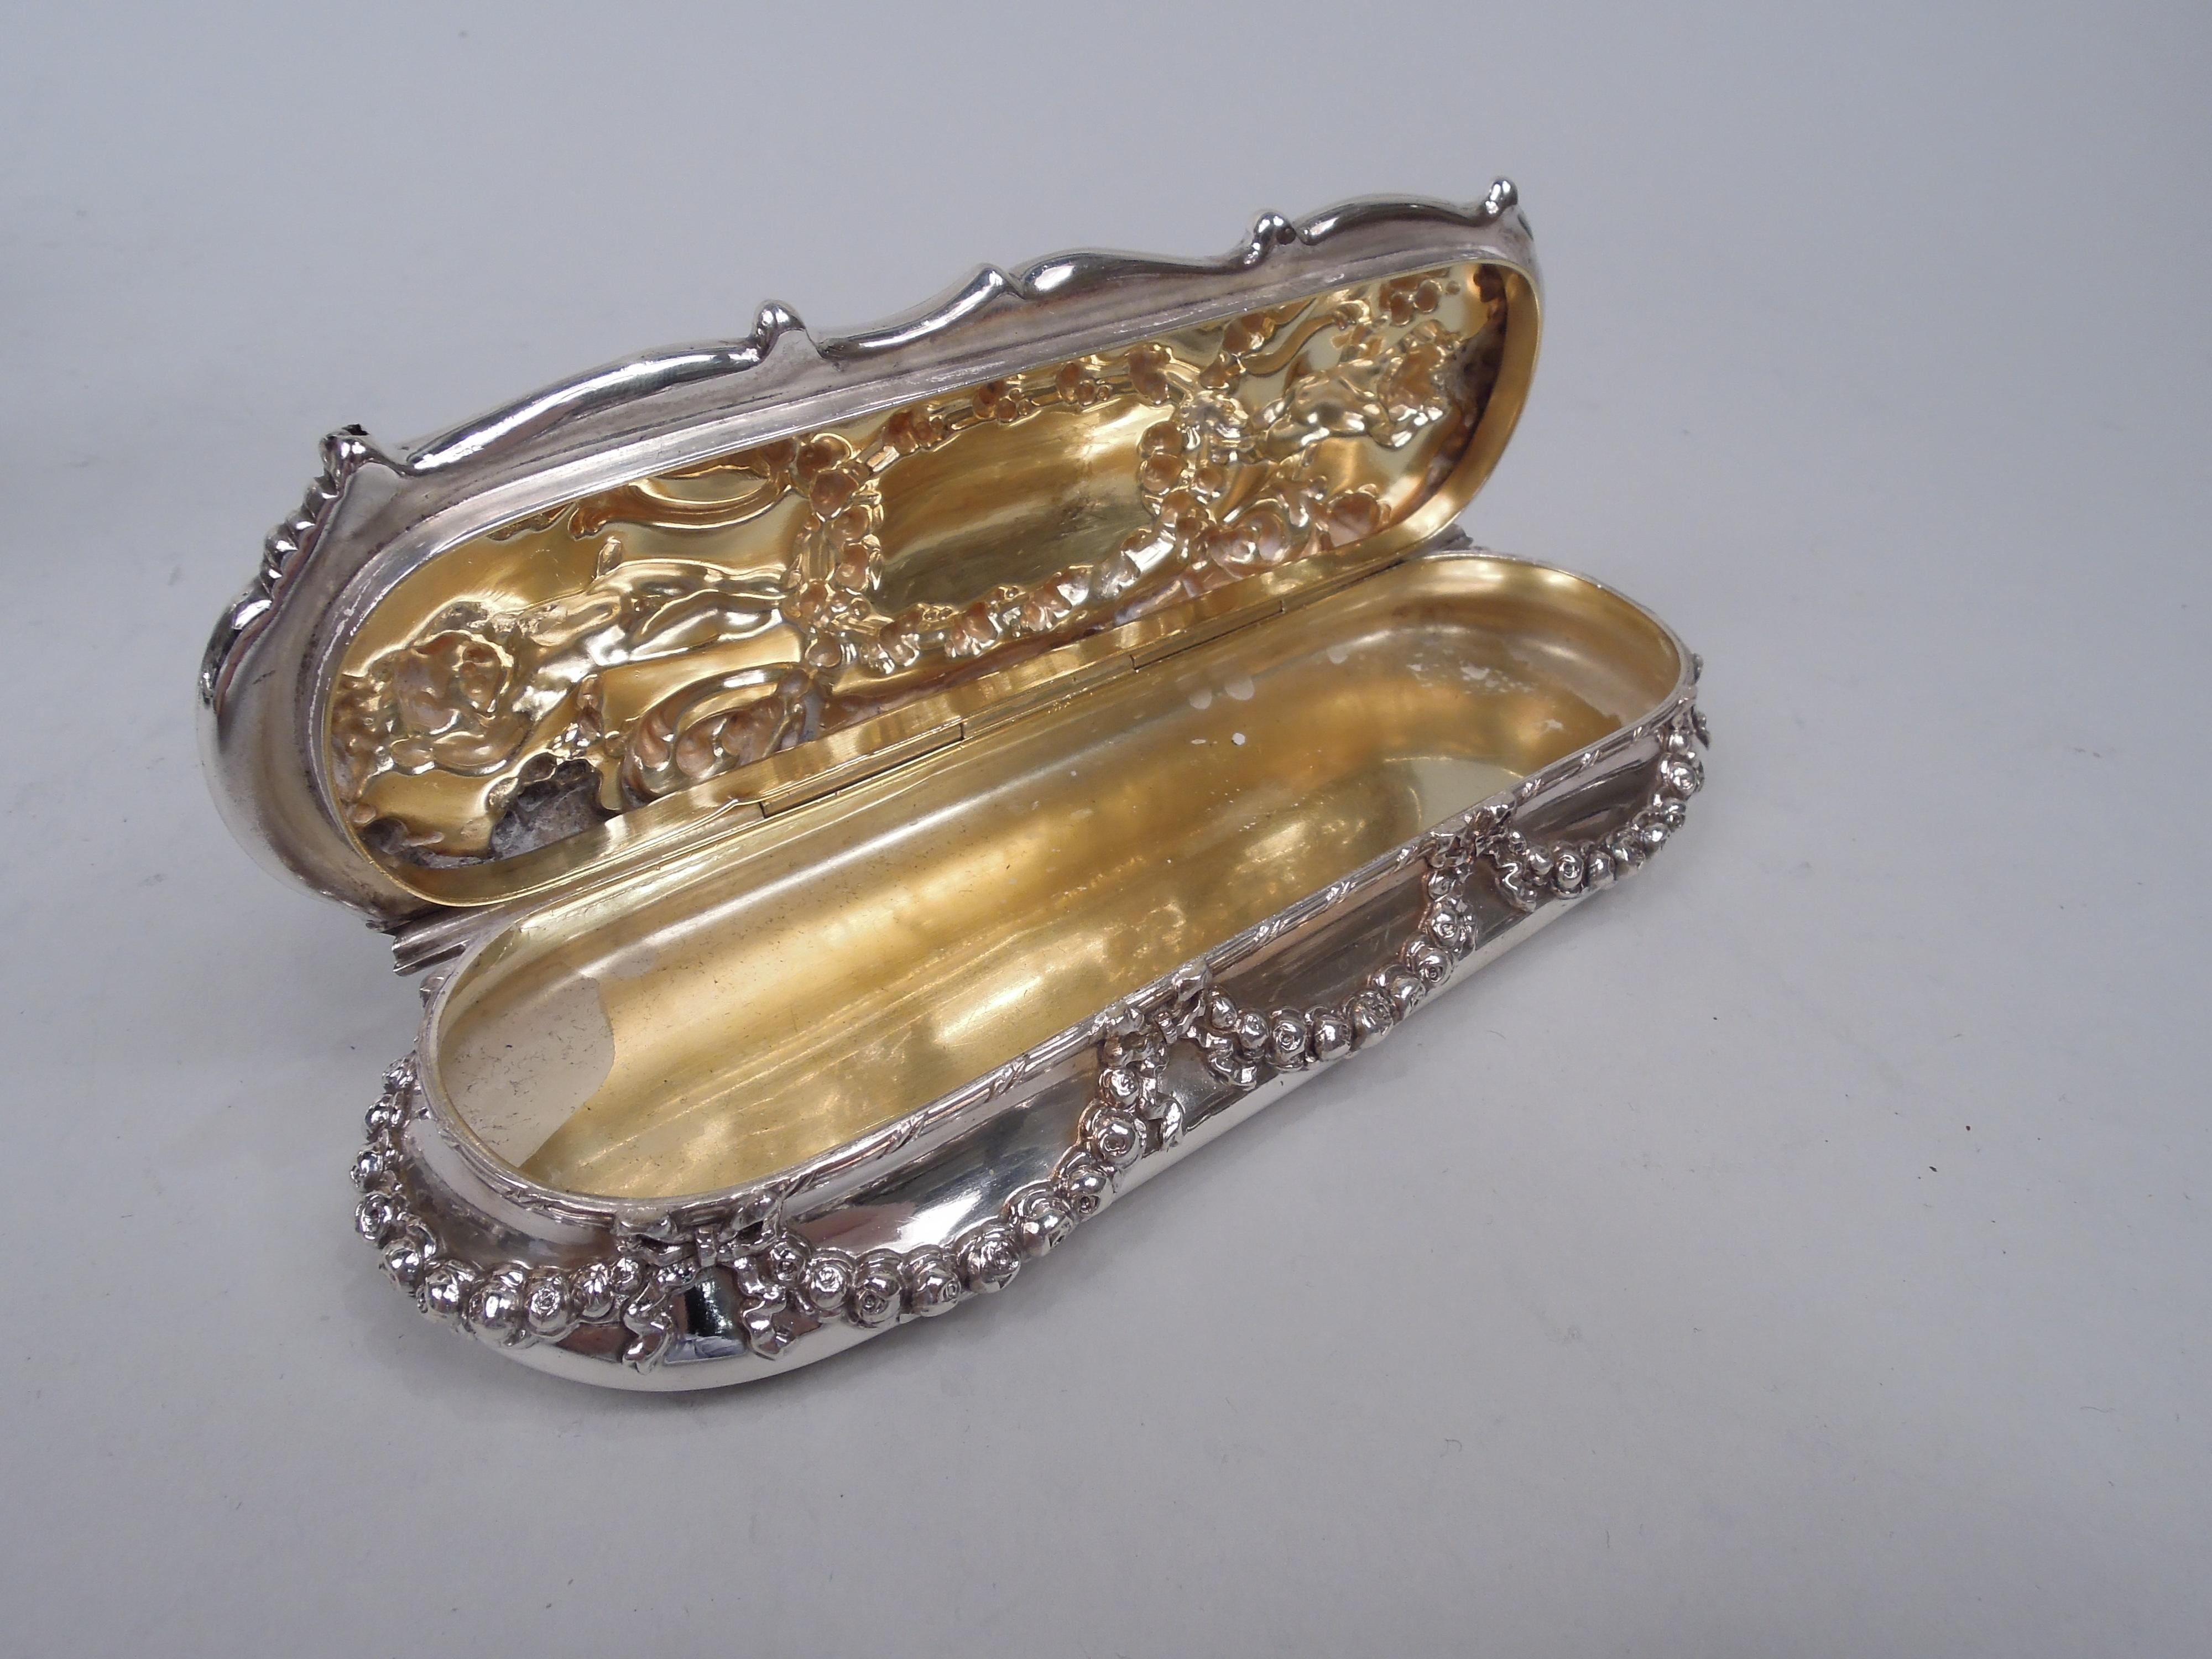 Edwardian Classical sterling silver trinket box. Made by Tiffany & Co. in New York. Oval with upward tapering sides and hinged scrolled cover. On sides applied ribbon-tied garland. On cover top chased scrolls threaded with garlands overlapping